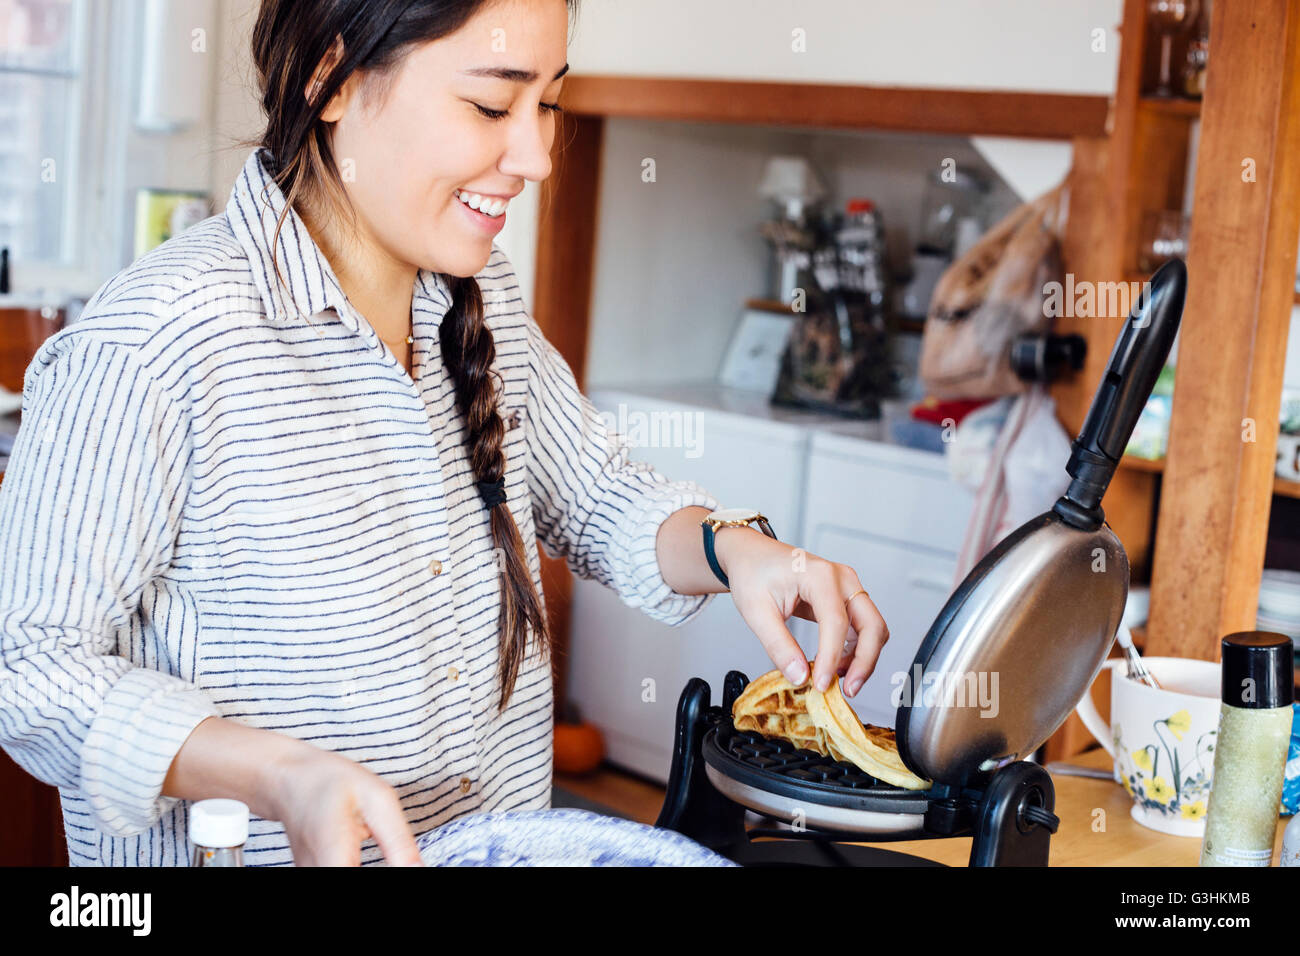 Woman in kitchen removing waffle from waffle iron smiling Stock Photo